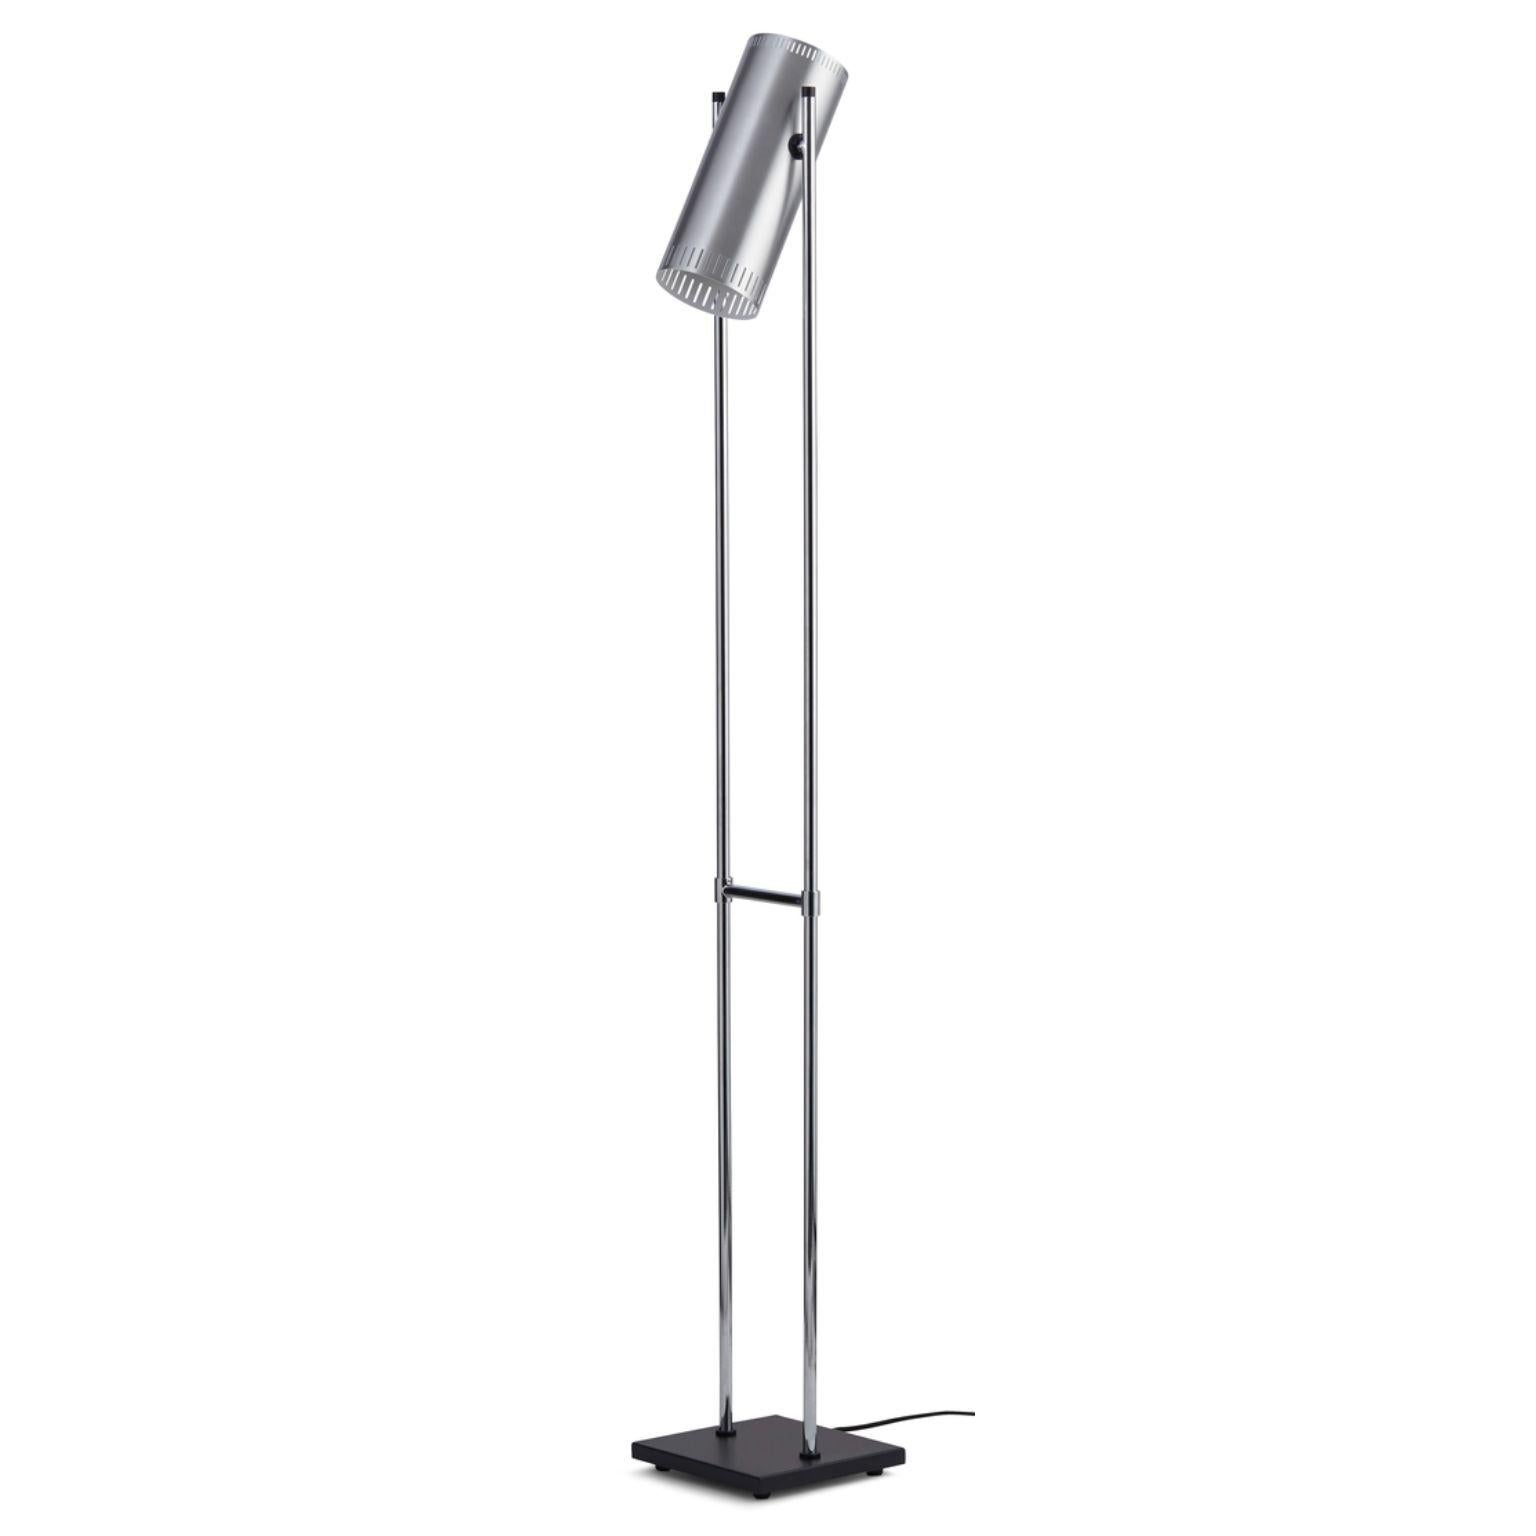 Trombone aluminium floor lamp by Warm Nordic
Dimensions: D20 x W18 x H136 cm
Material: Brushed aluminium
Weight: 2 kg
Also available in different finishes. 

Warm Nordic is an ambitious design brand anchored in Nordic design history and with a